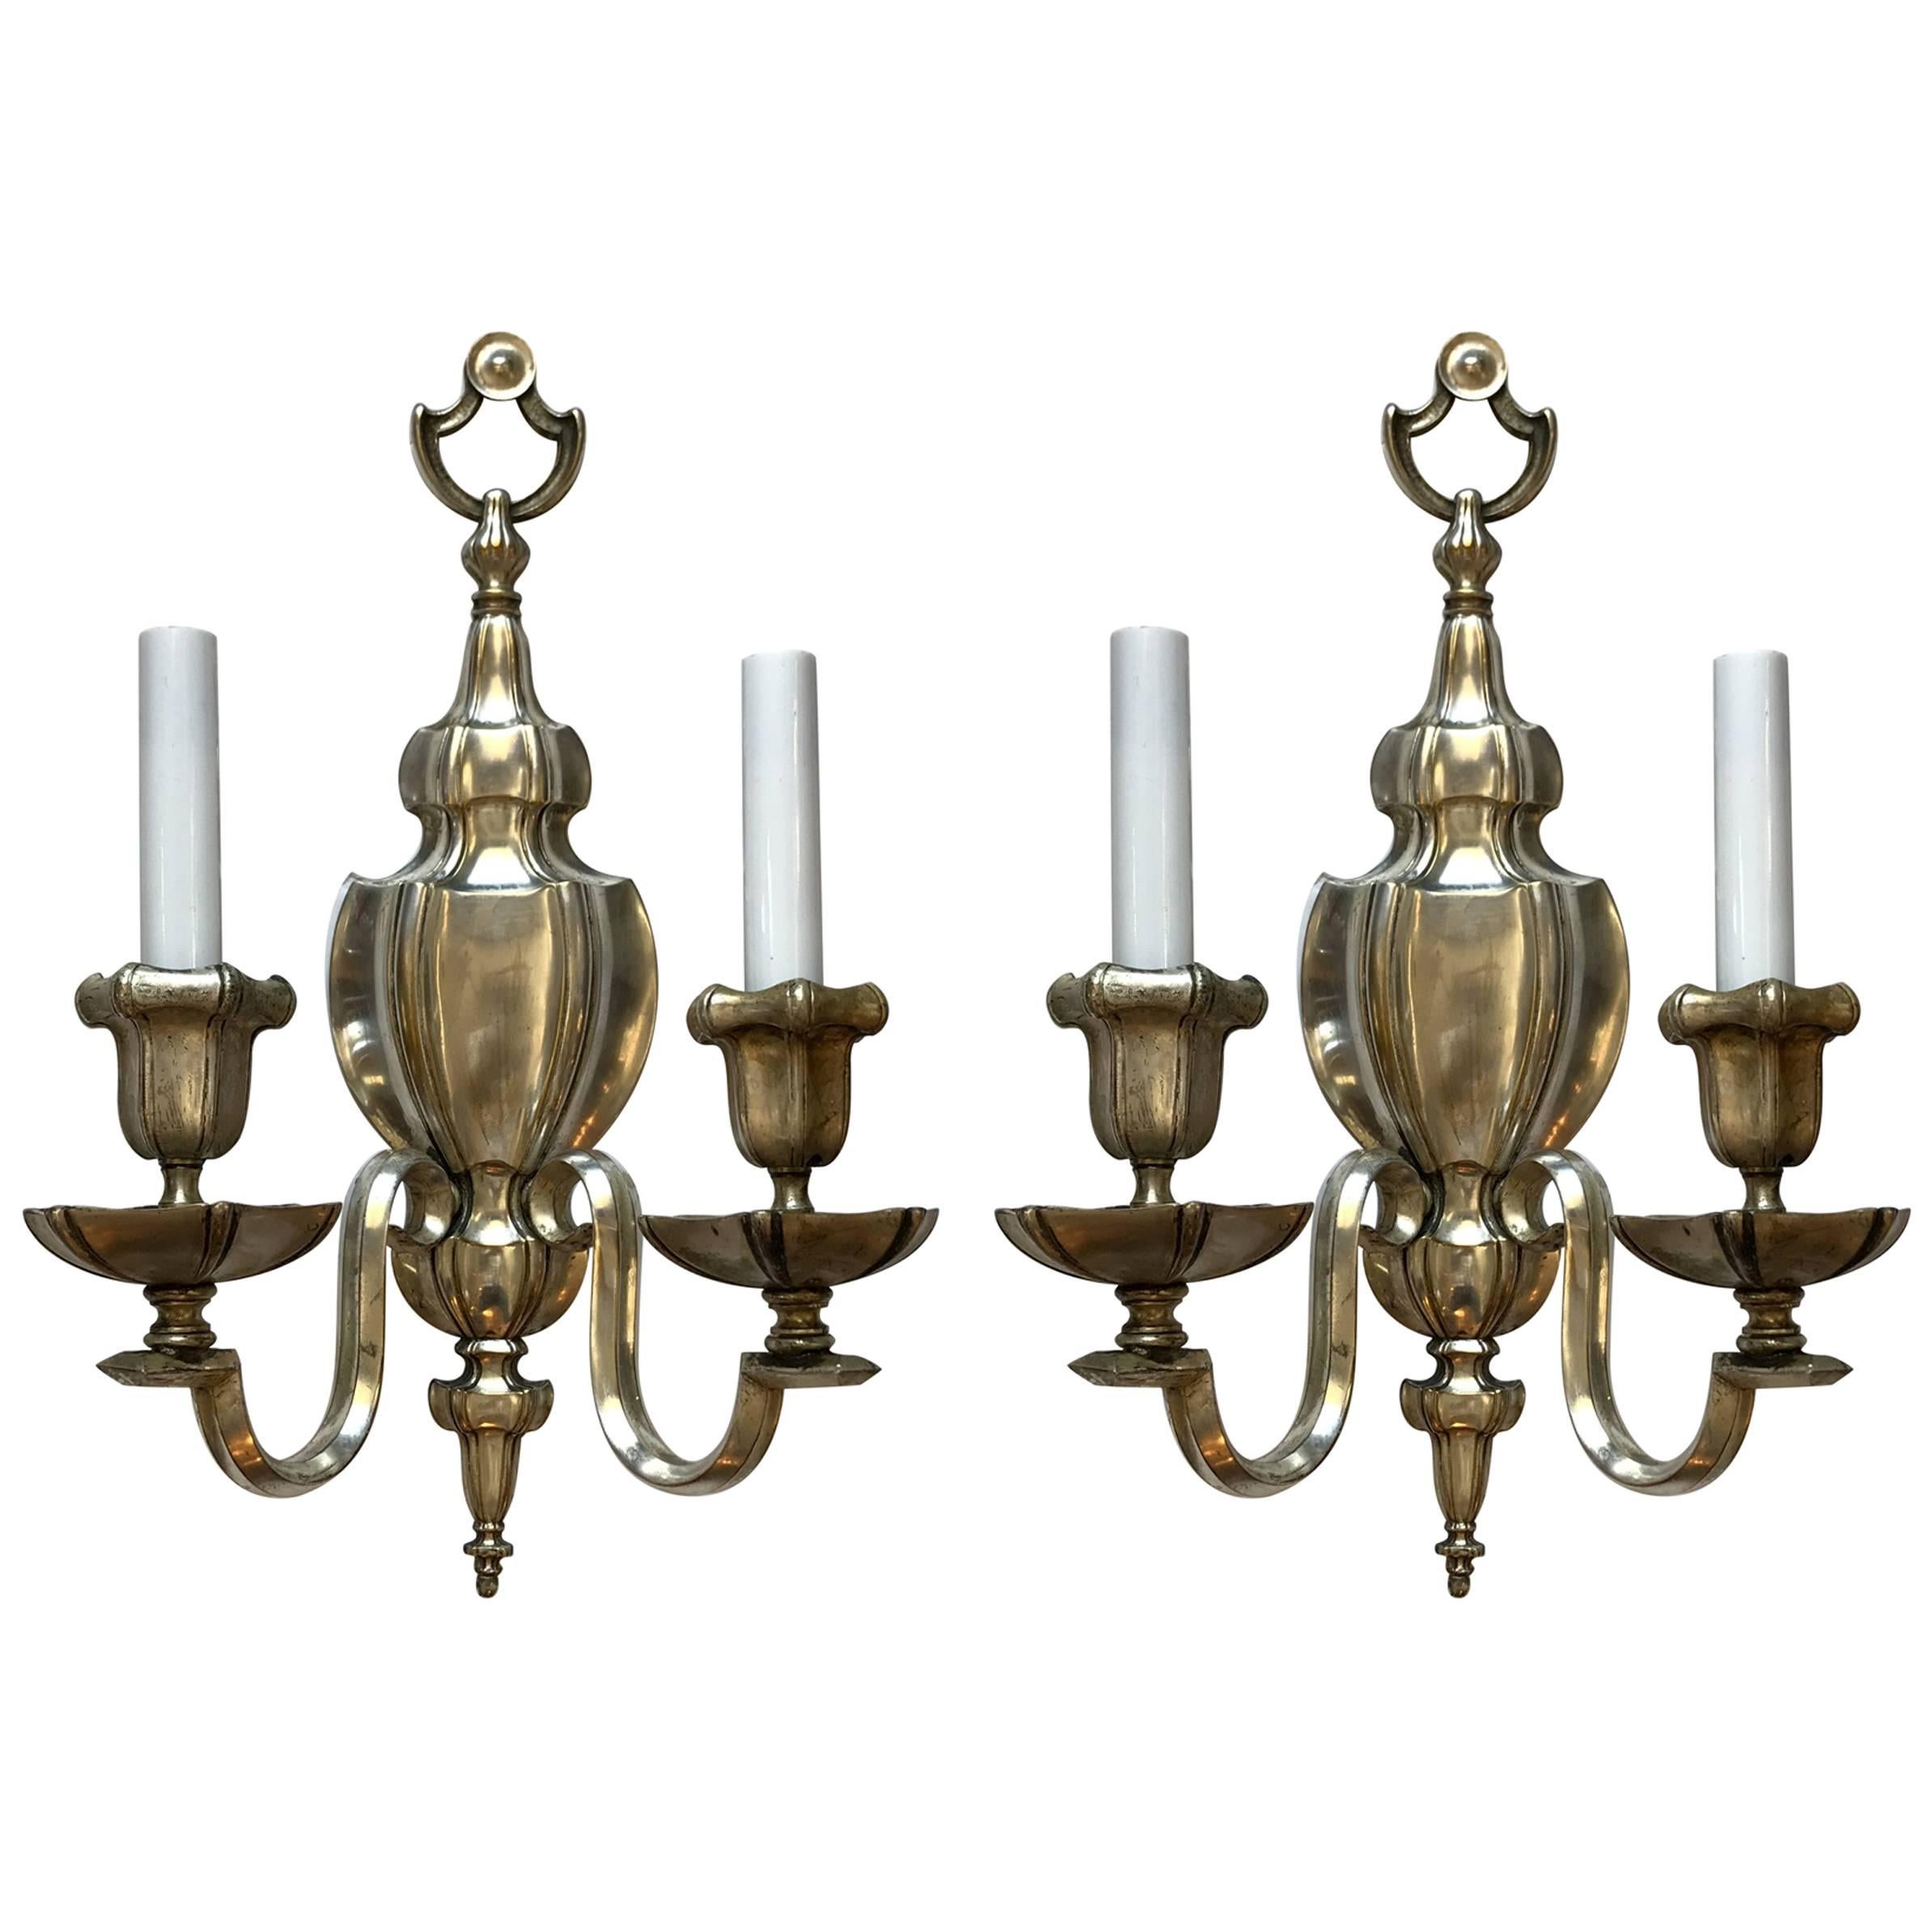 Hansom Pair Of Caldwell Georgian Silvered Bronze Neoclassical Urn Form Sconces